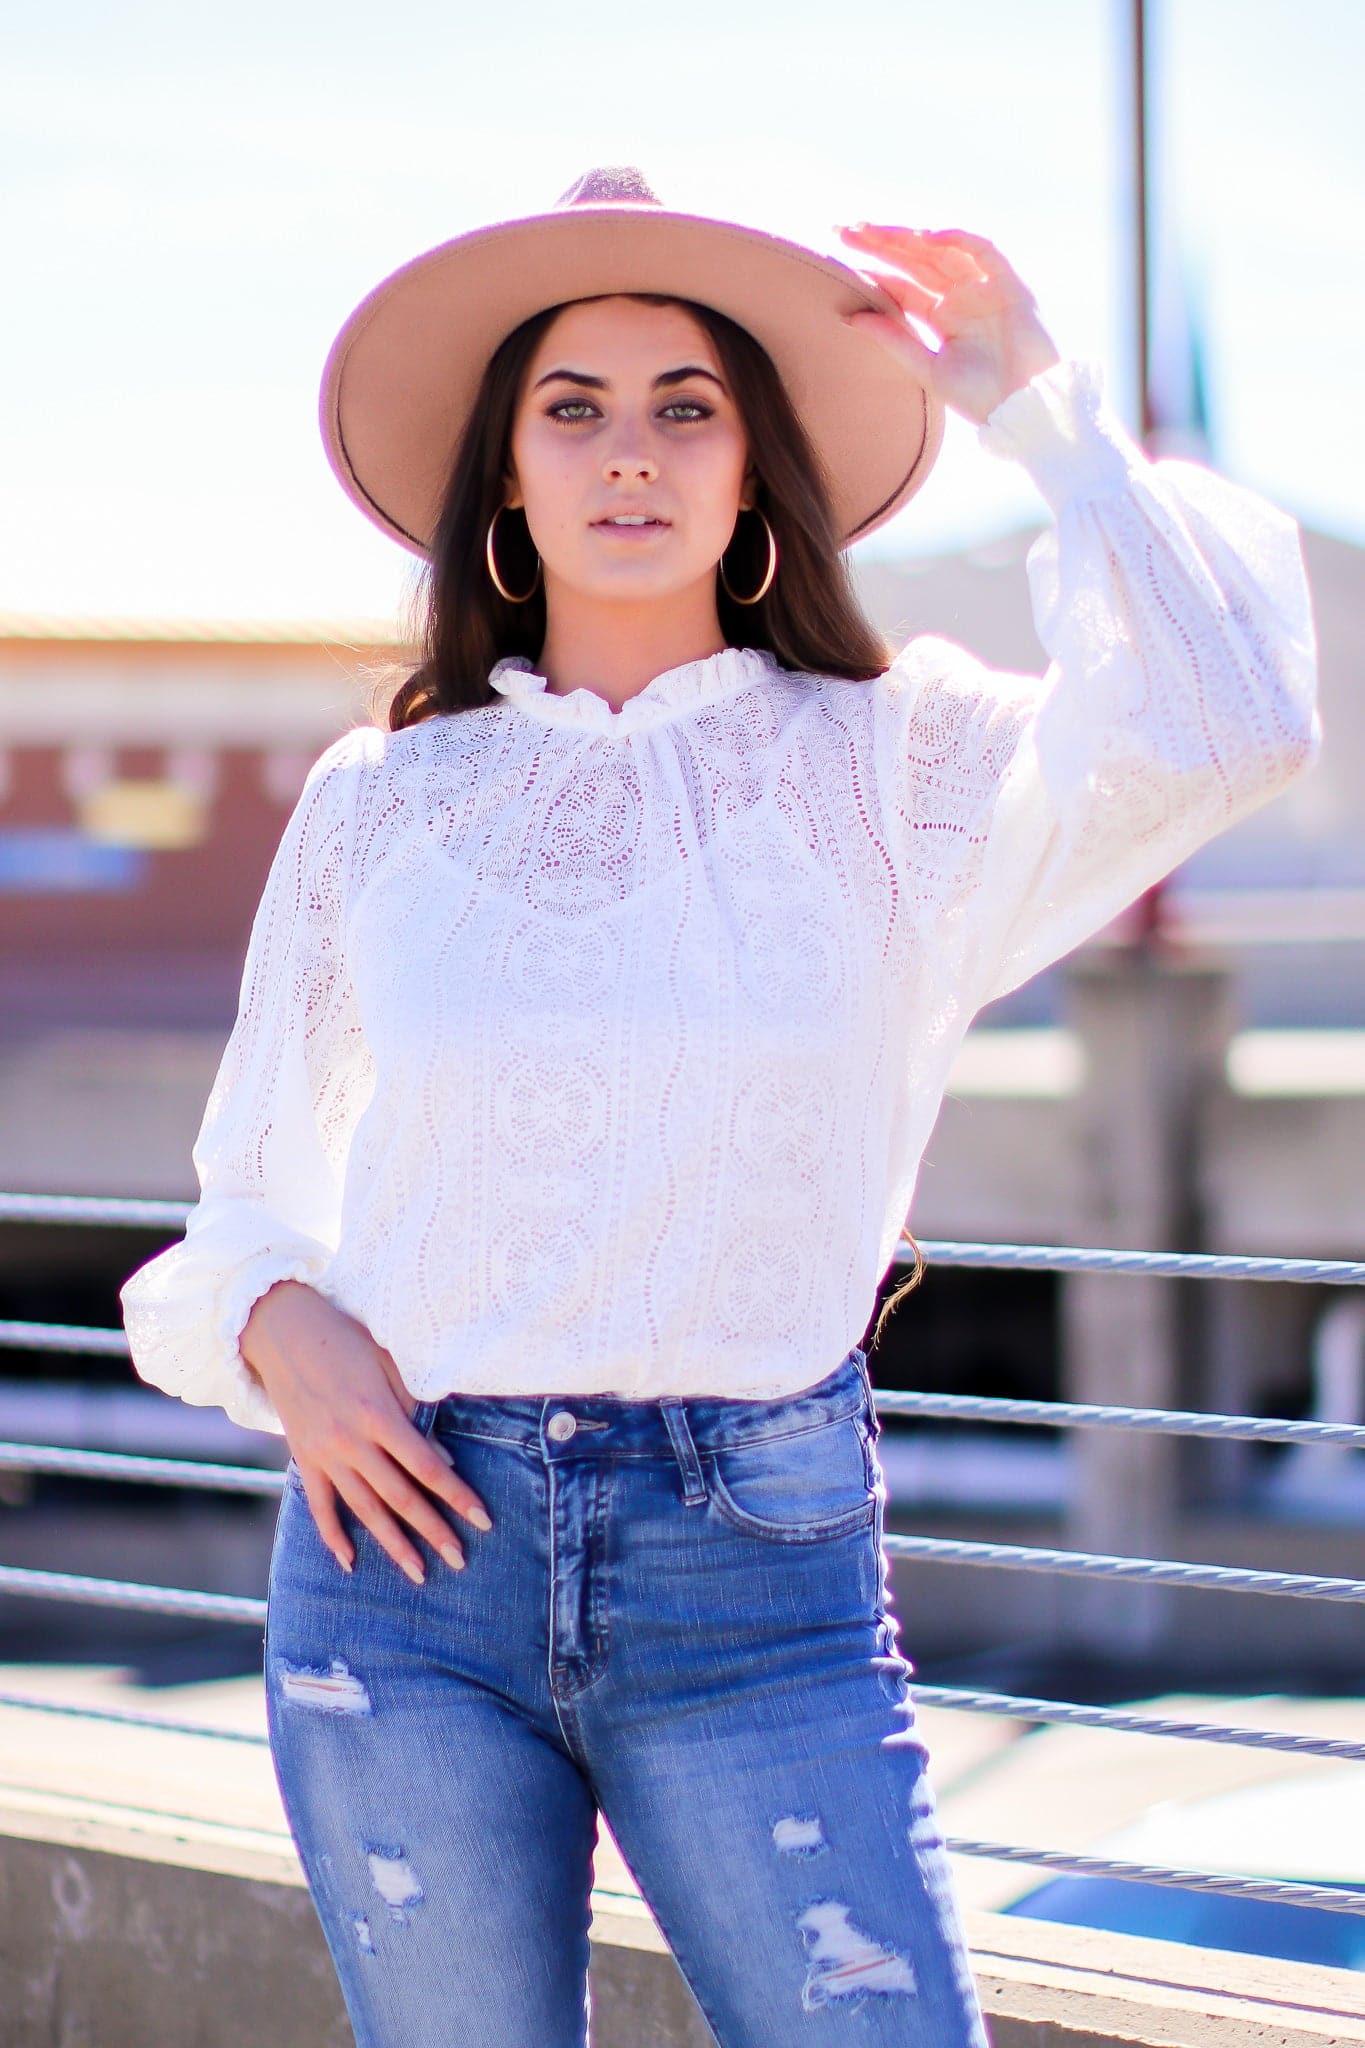  Thoughts of You High Neck Lace Top - FINAL SALE - Madison and Mallory